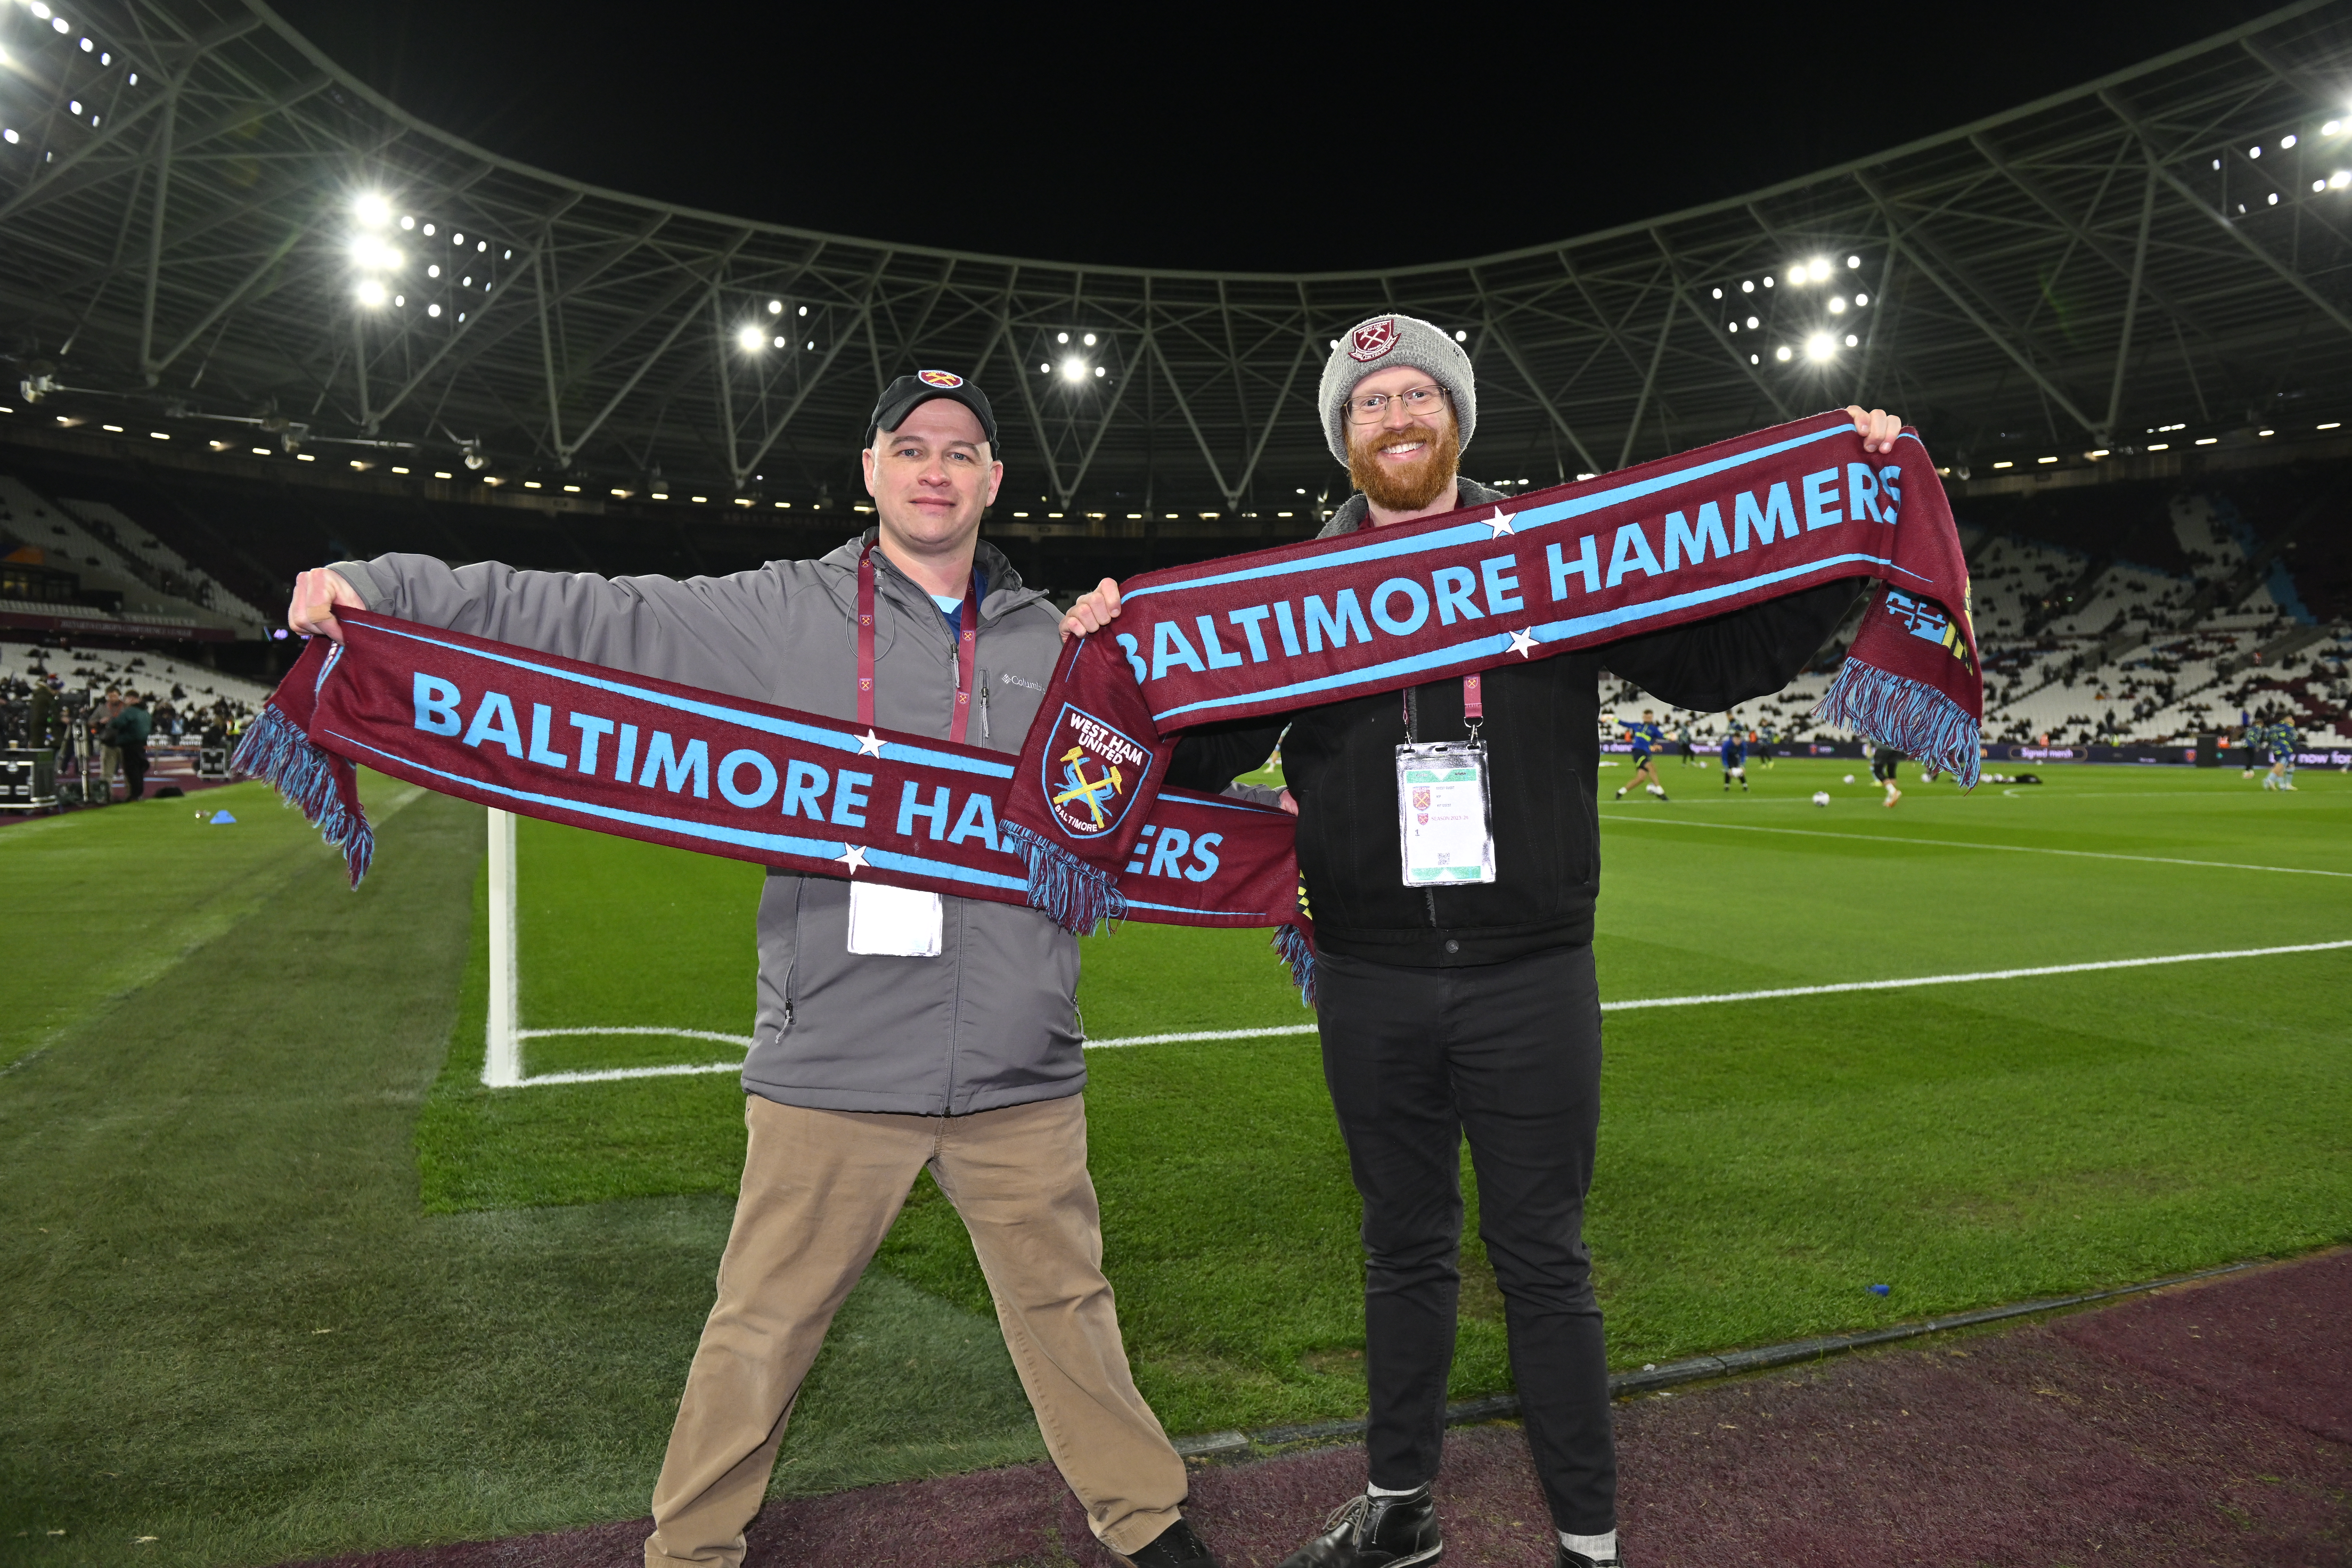 Baltimore Hammers